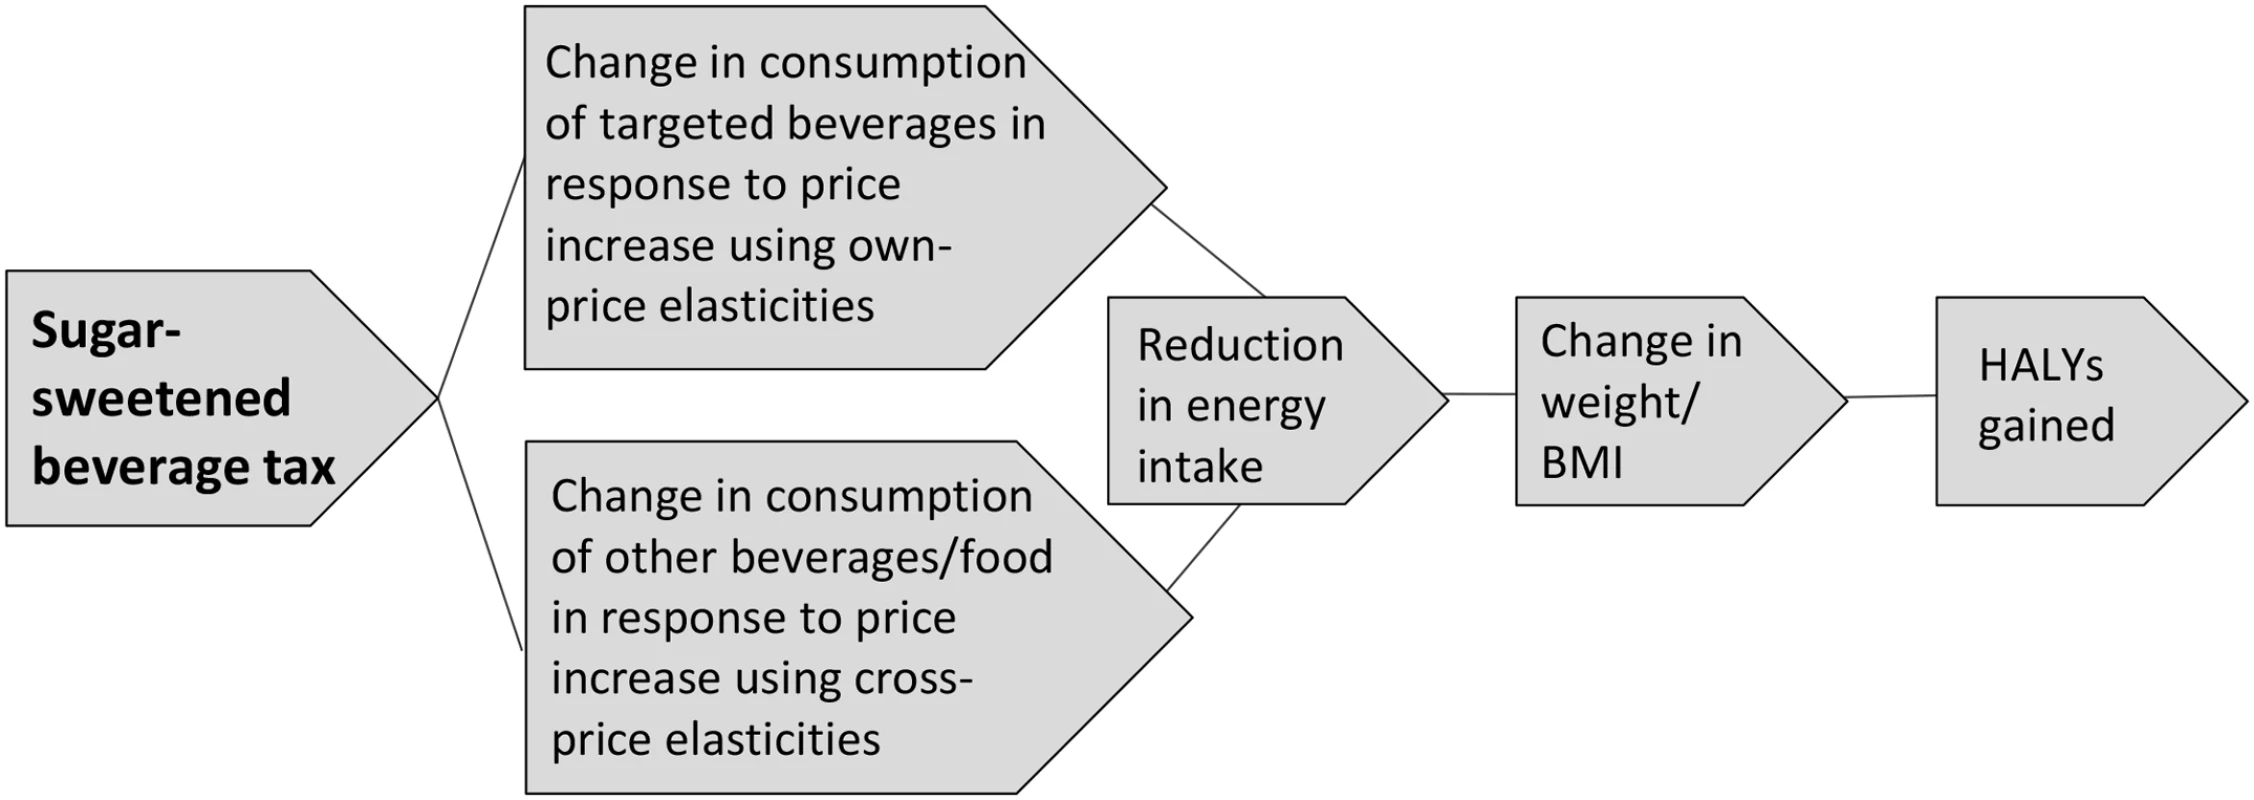 Logic pathway for modelling the health effects of a sugar-sweetened beverage tax.